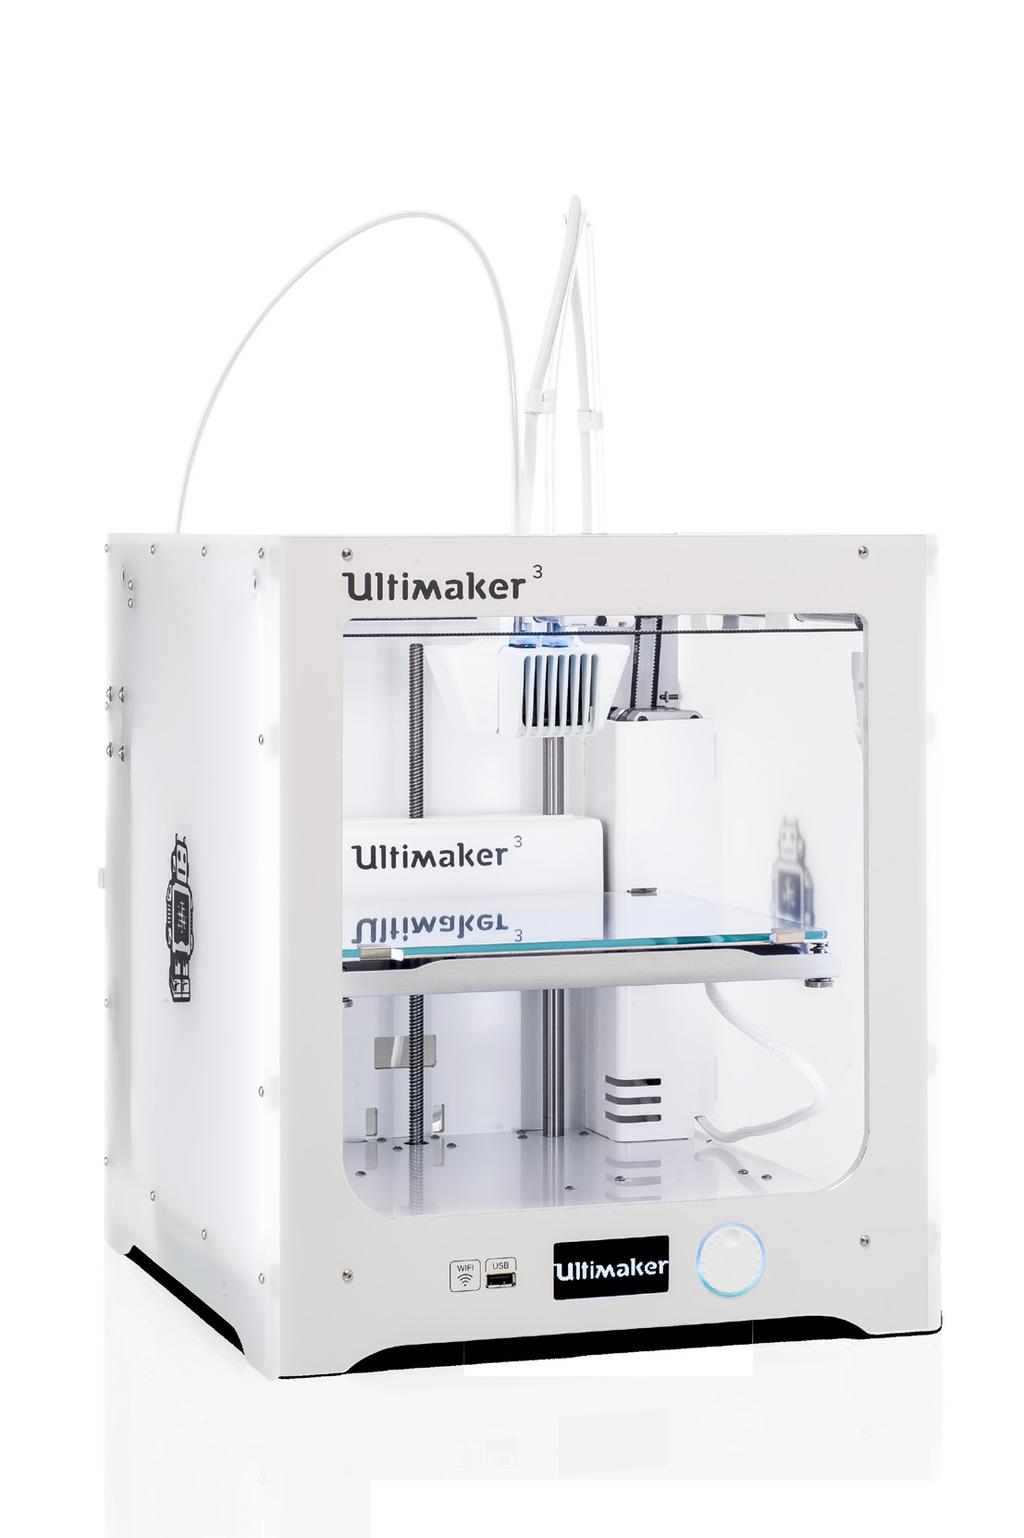 3D printing basics How does a 3D printer work? The Ultimaker 3 is an FDM 3D printer. FDM stands for Fused Deposition Modeling.